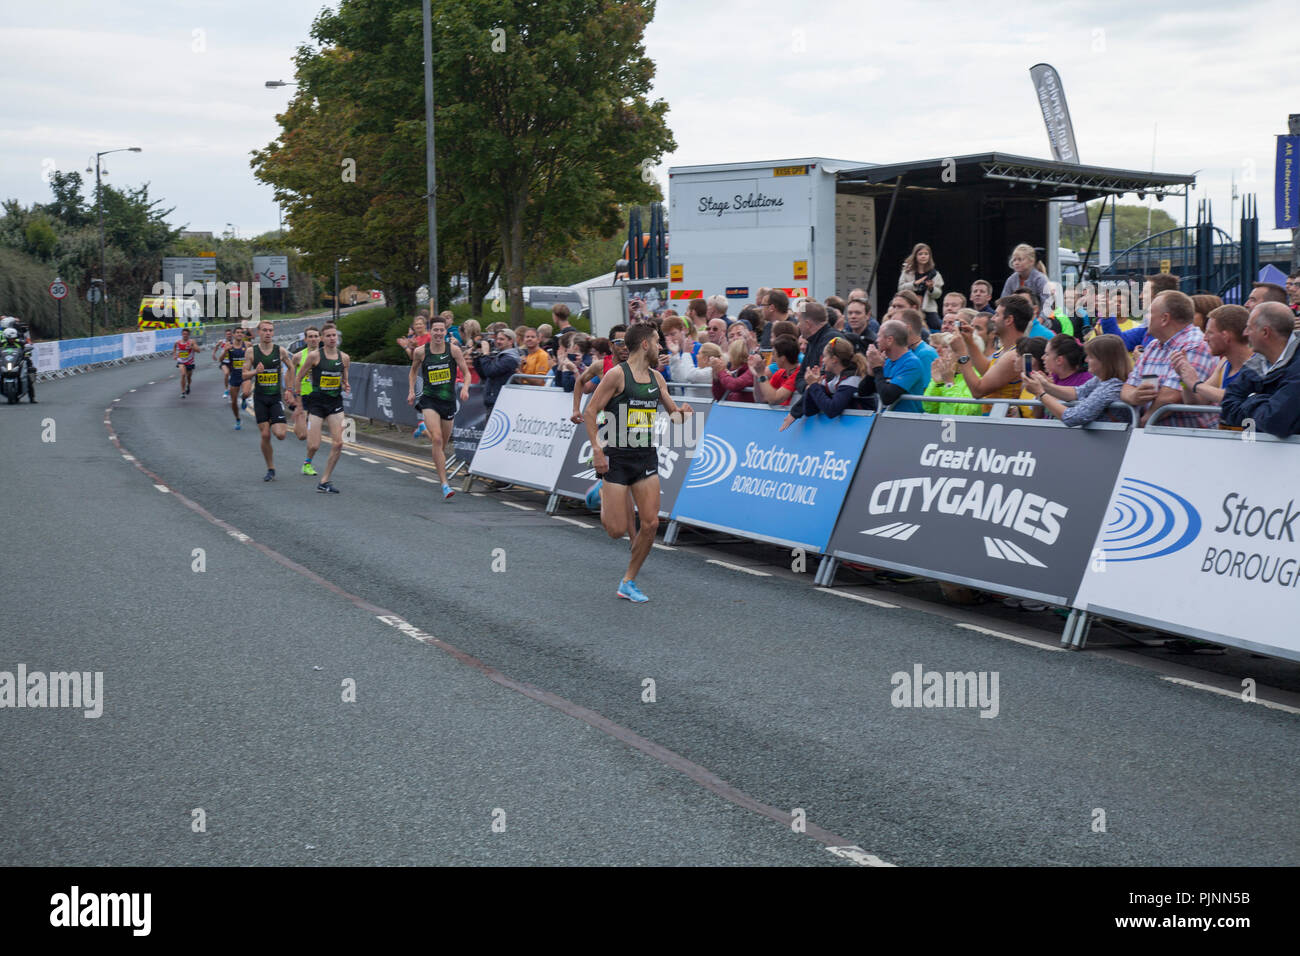 Stockton on Tees, UK, 8th September 2018. An overcast day for the Great North City Games Elite Mile Races and the Simplyhealth Great Tees 10k races that passed through the Riverside Road. The runners enjoying the cooler weather conditions for the races. Credit DAVID DIXON / Alamy Live News. Stock Photo